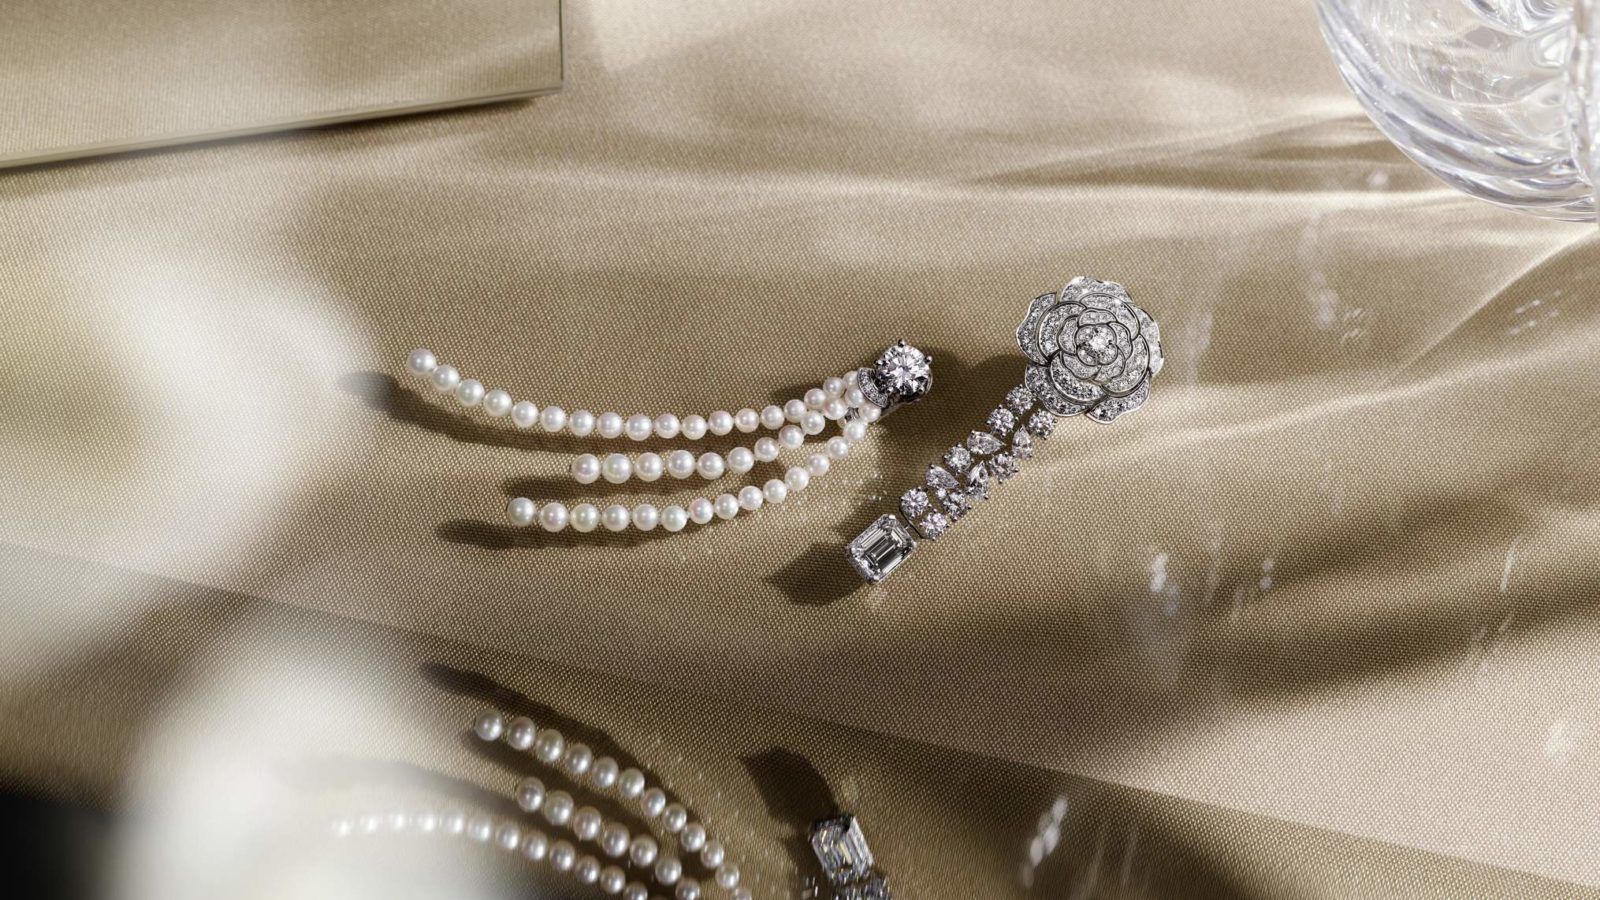 Chanel's latest high jewellery watch releases for 2020